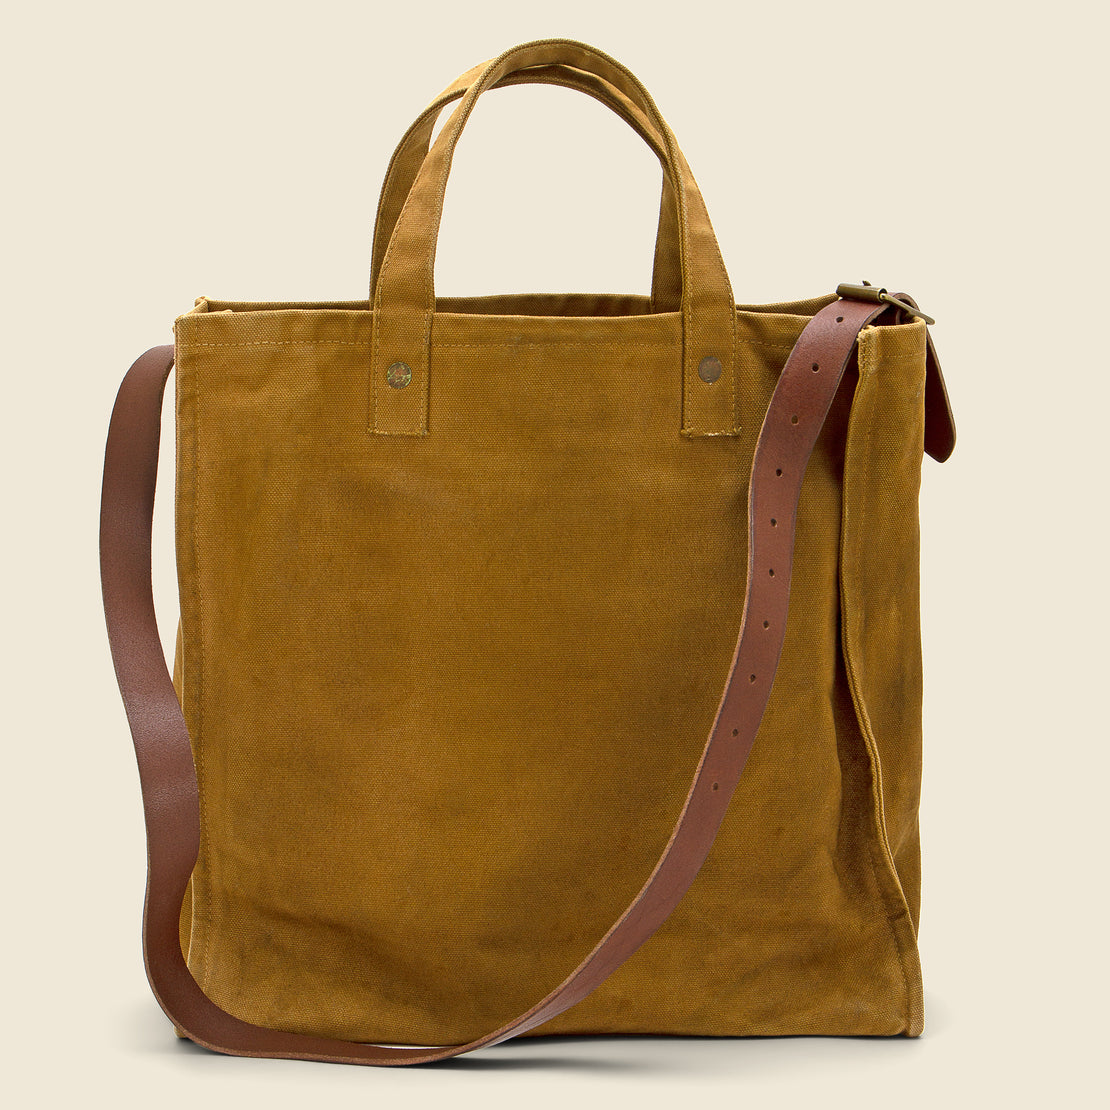 Carpenter Tote Bag - Distressed Khaki - RRL - STAG Provisions - Accessories - Bags / Luggage